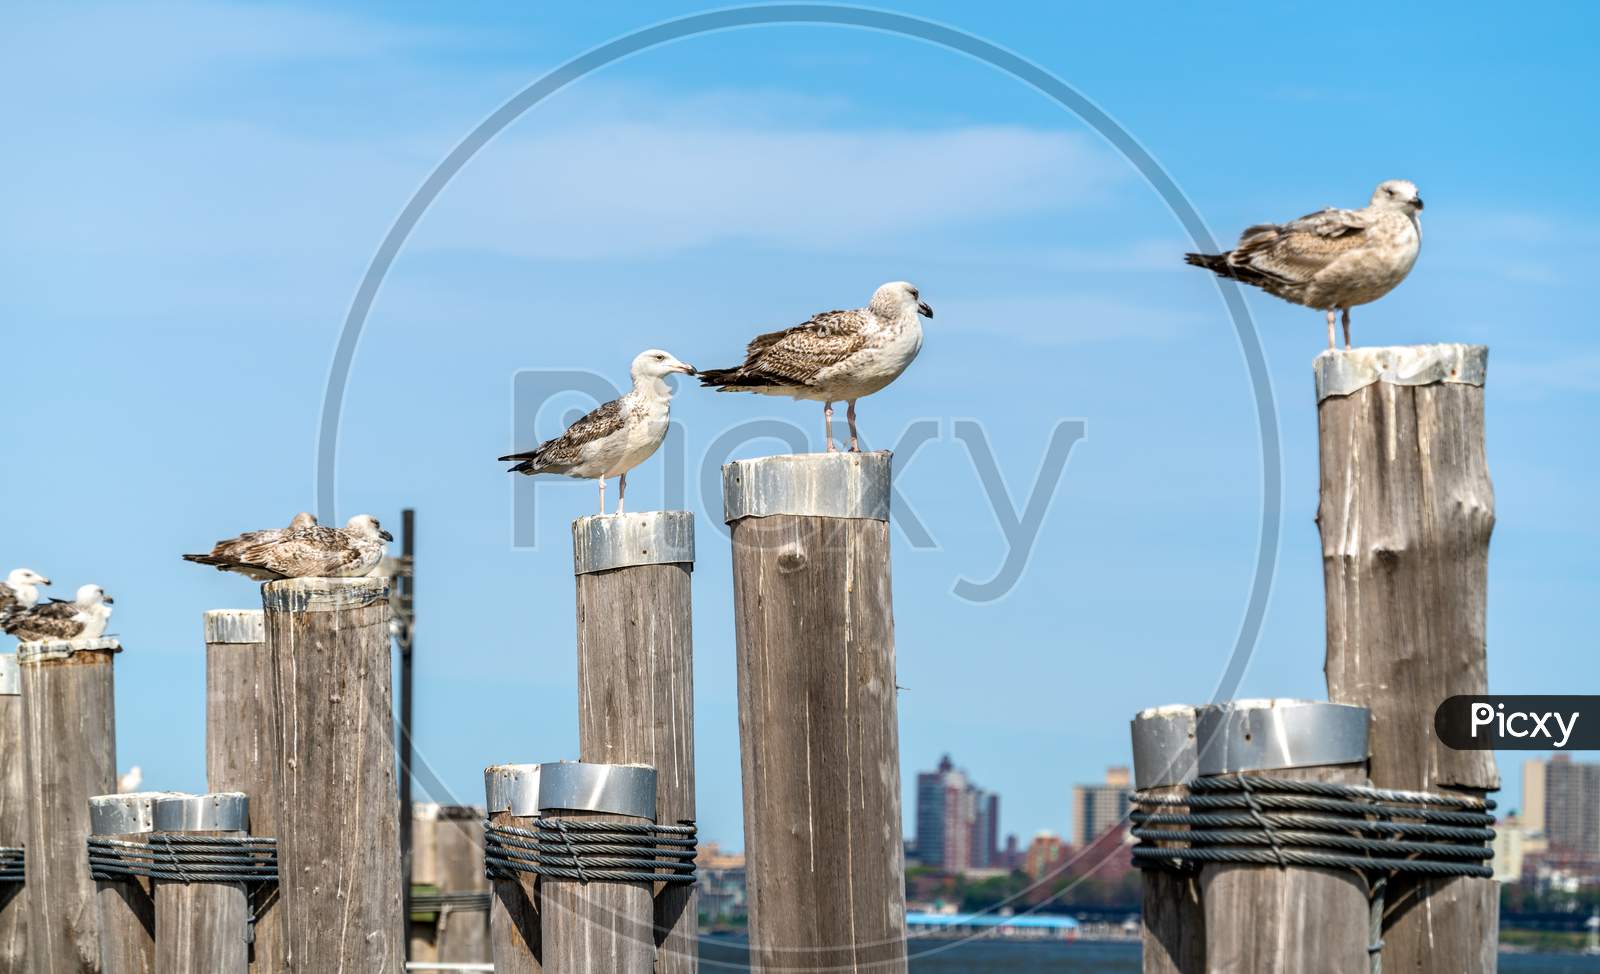 Seagulls At The Old Ferry Dock On Liberty Island Near New York City